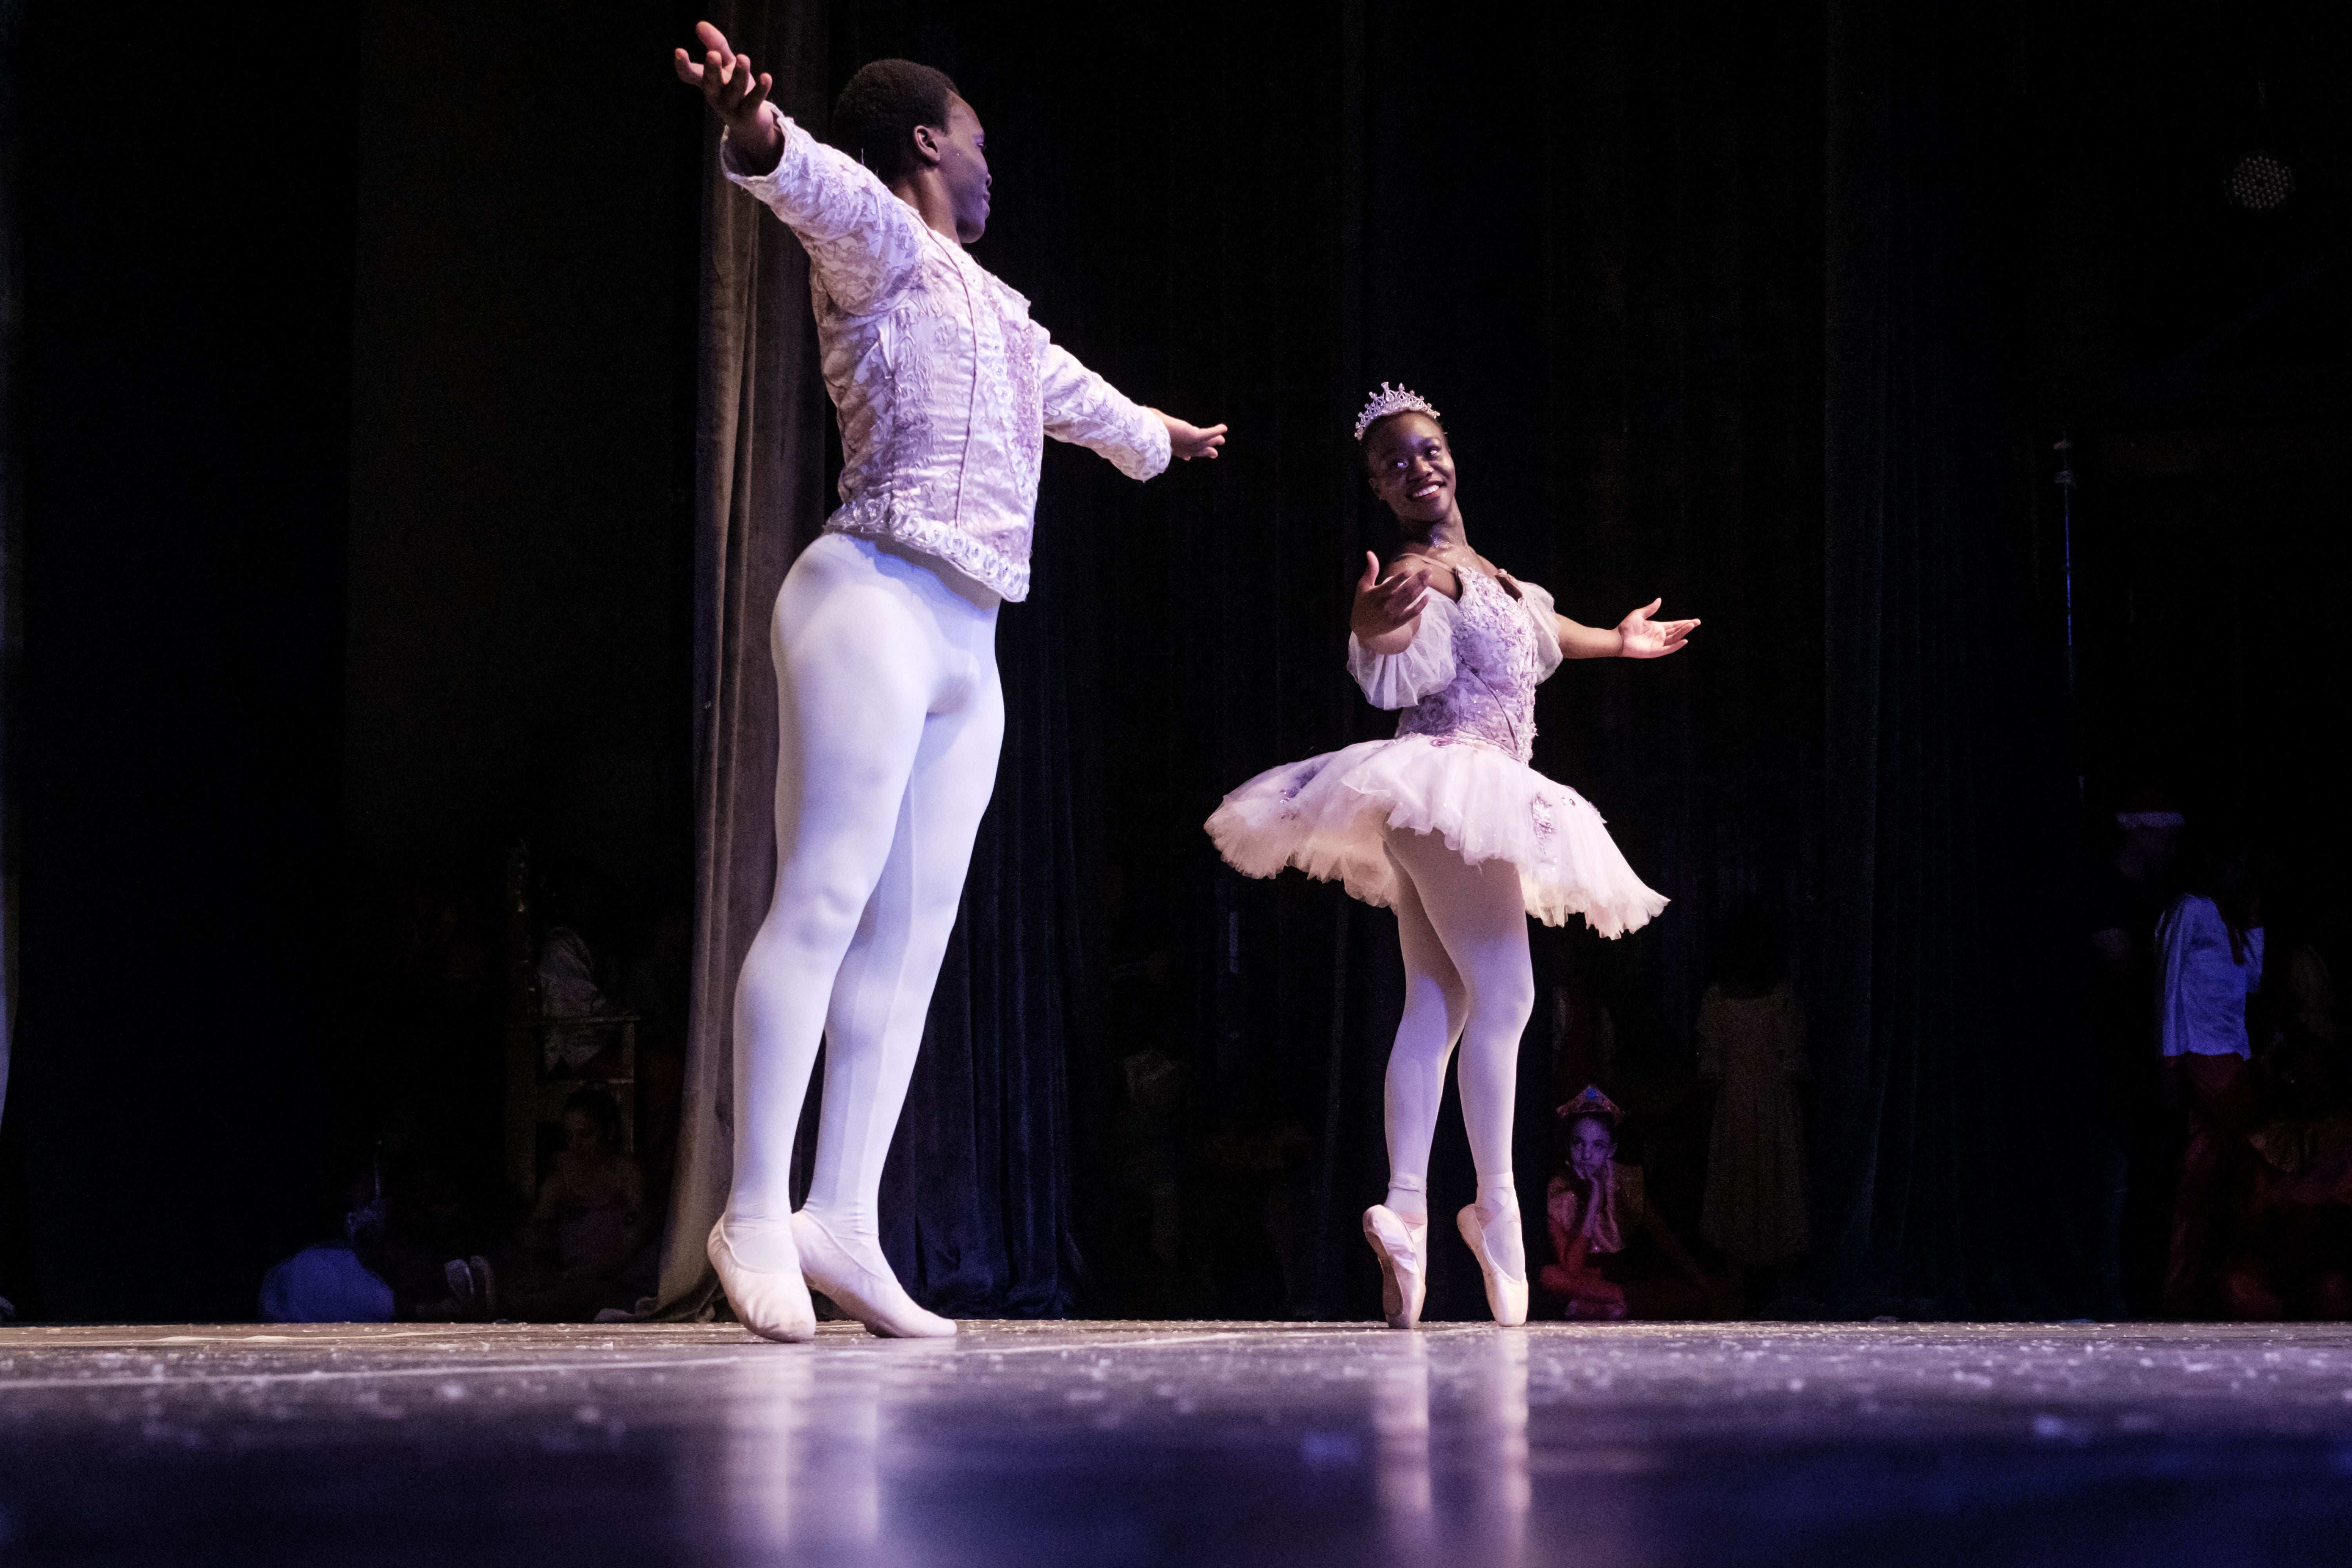 Pamela Atieno (right) and Shamick Otieno (left) dance during a production of ‘The Nutcracker’ by the Dance Centre Kenya (DCK) with the Nairobi Philharmonic Orchestra at the National Theatre in Nairobi on 4 December 2022